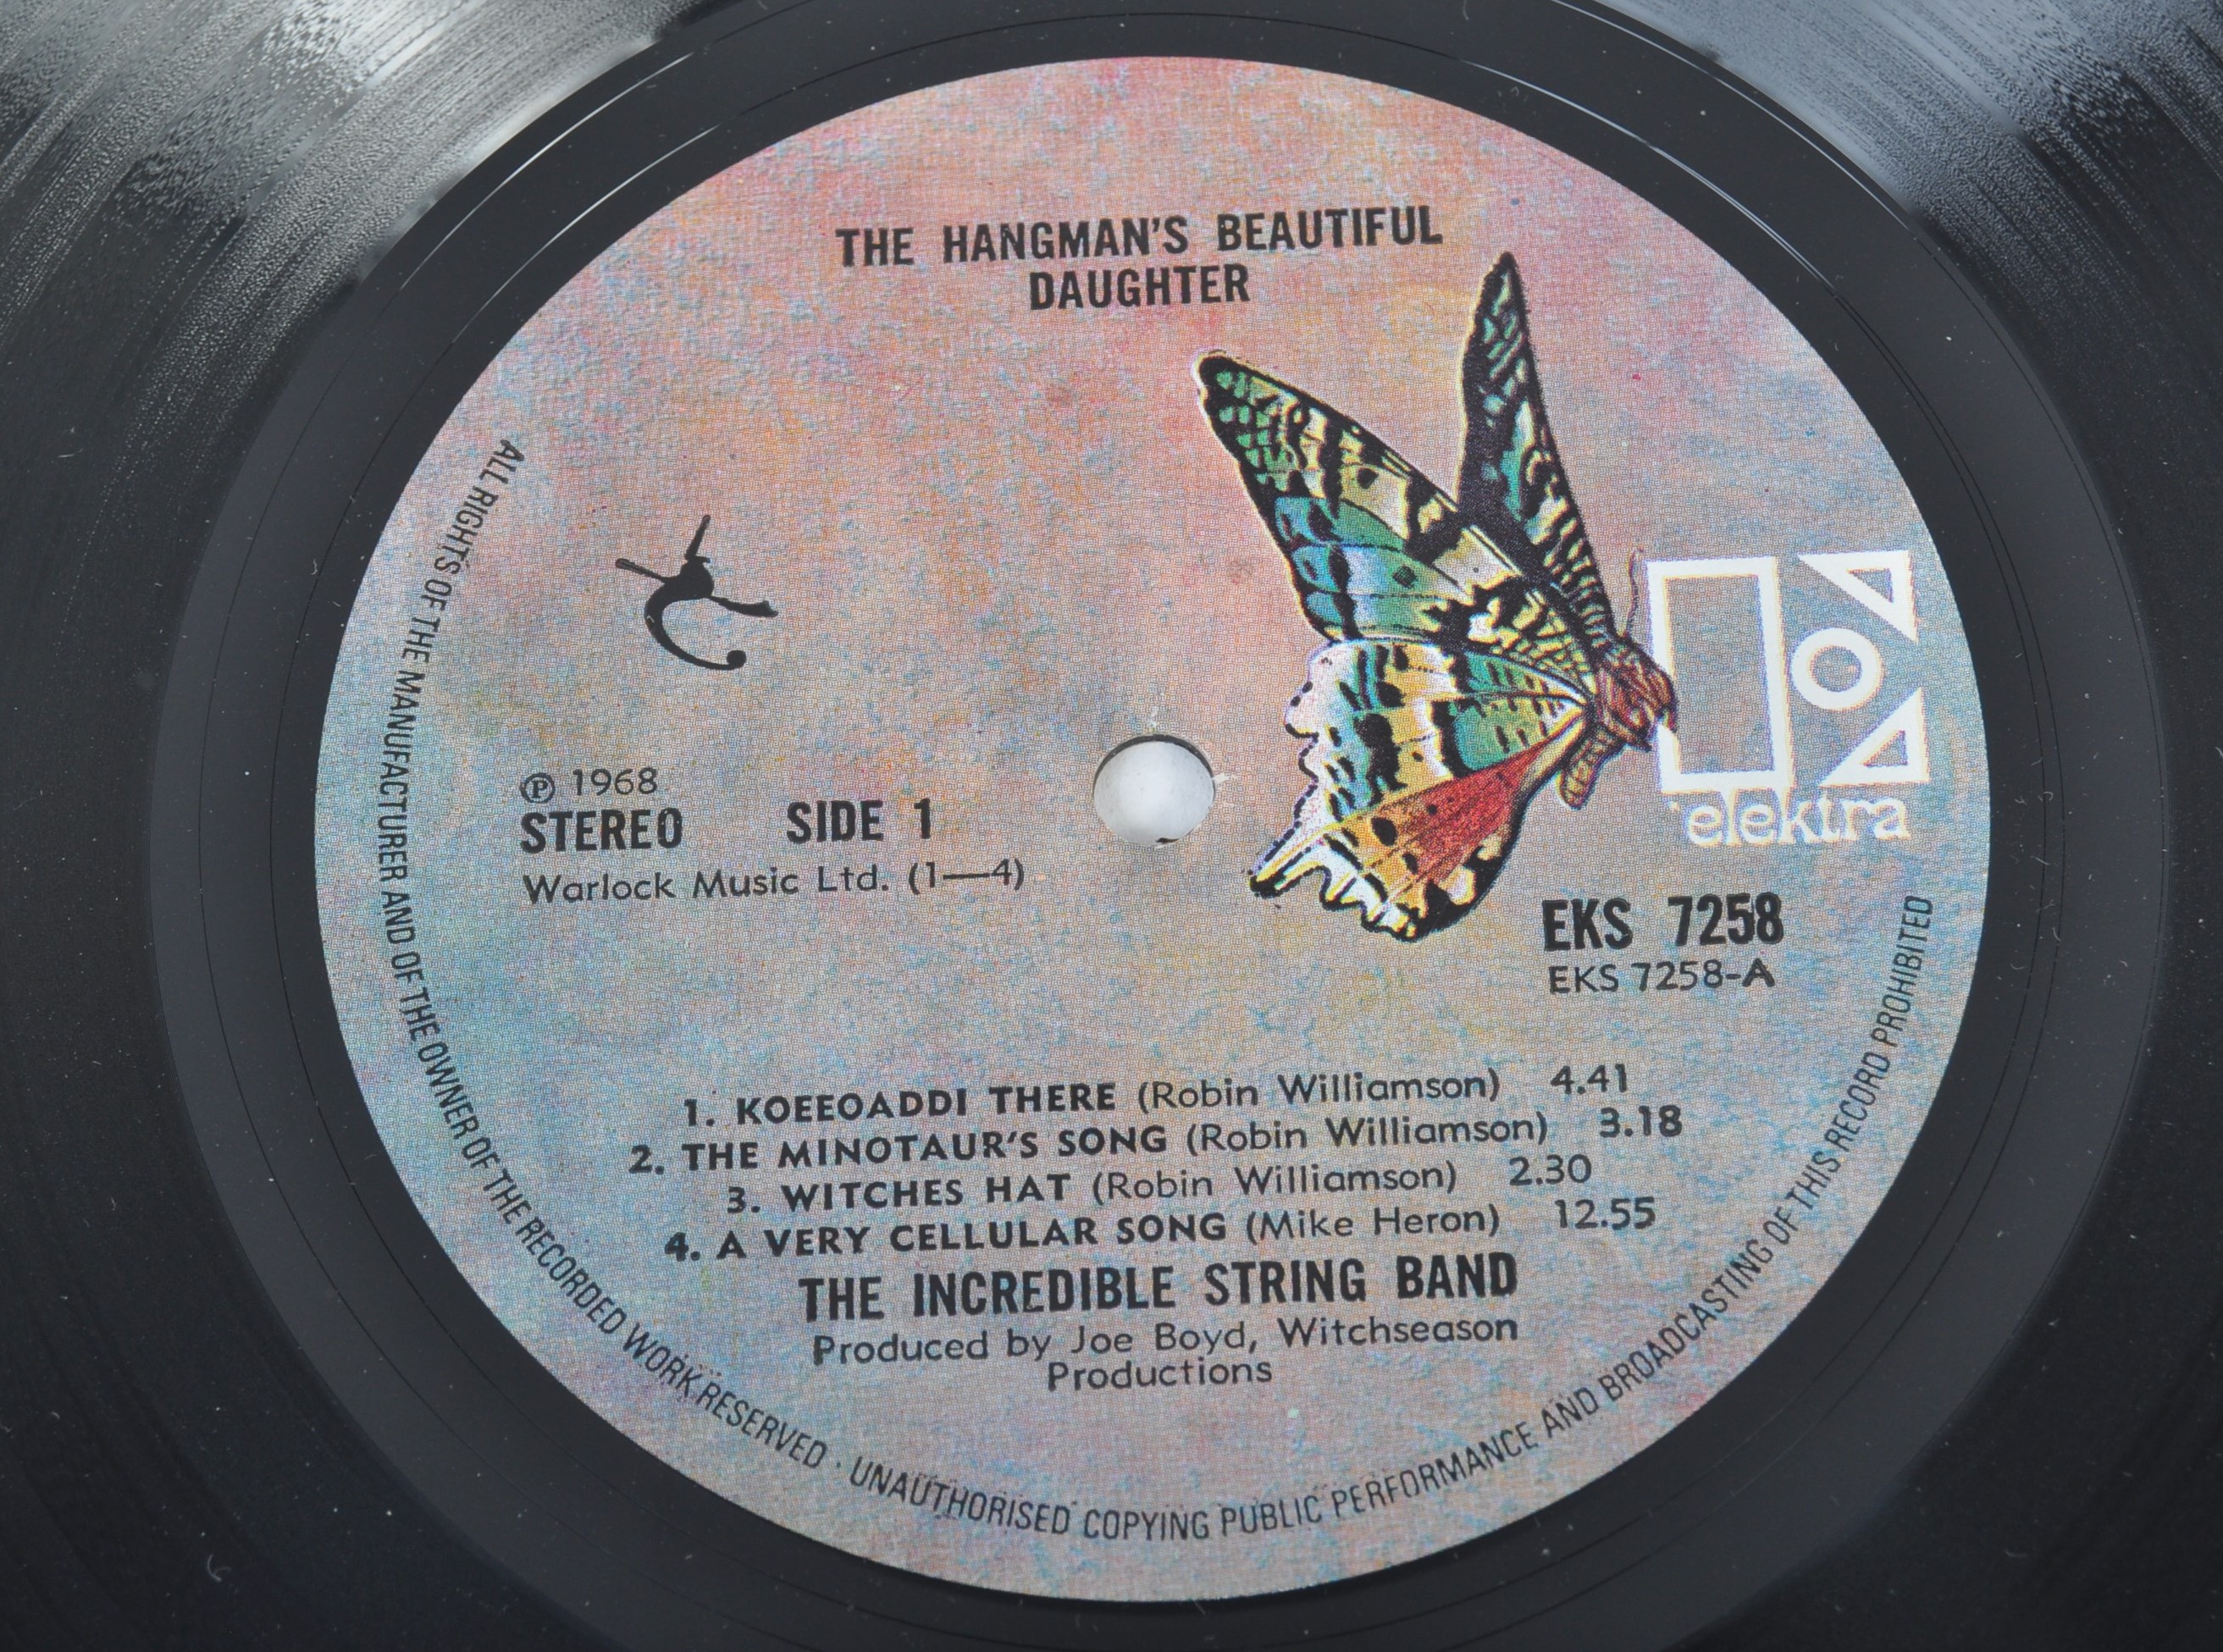 THE INCREDIBLE STRING BAND - TWO VINYL RECORD ALBUMS - Image 6 of 6